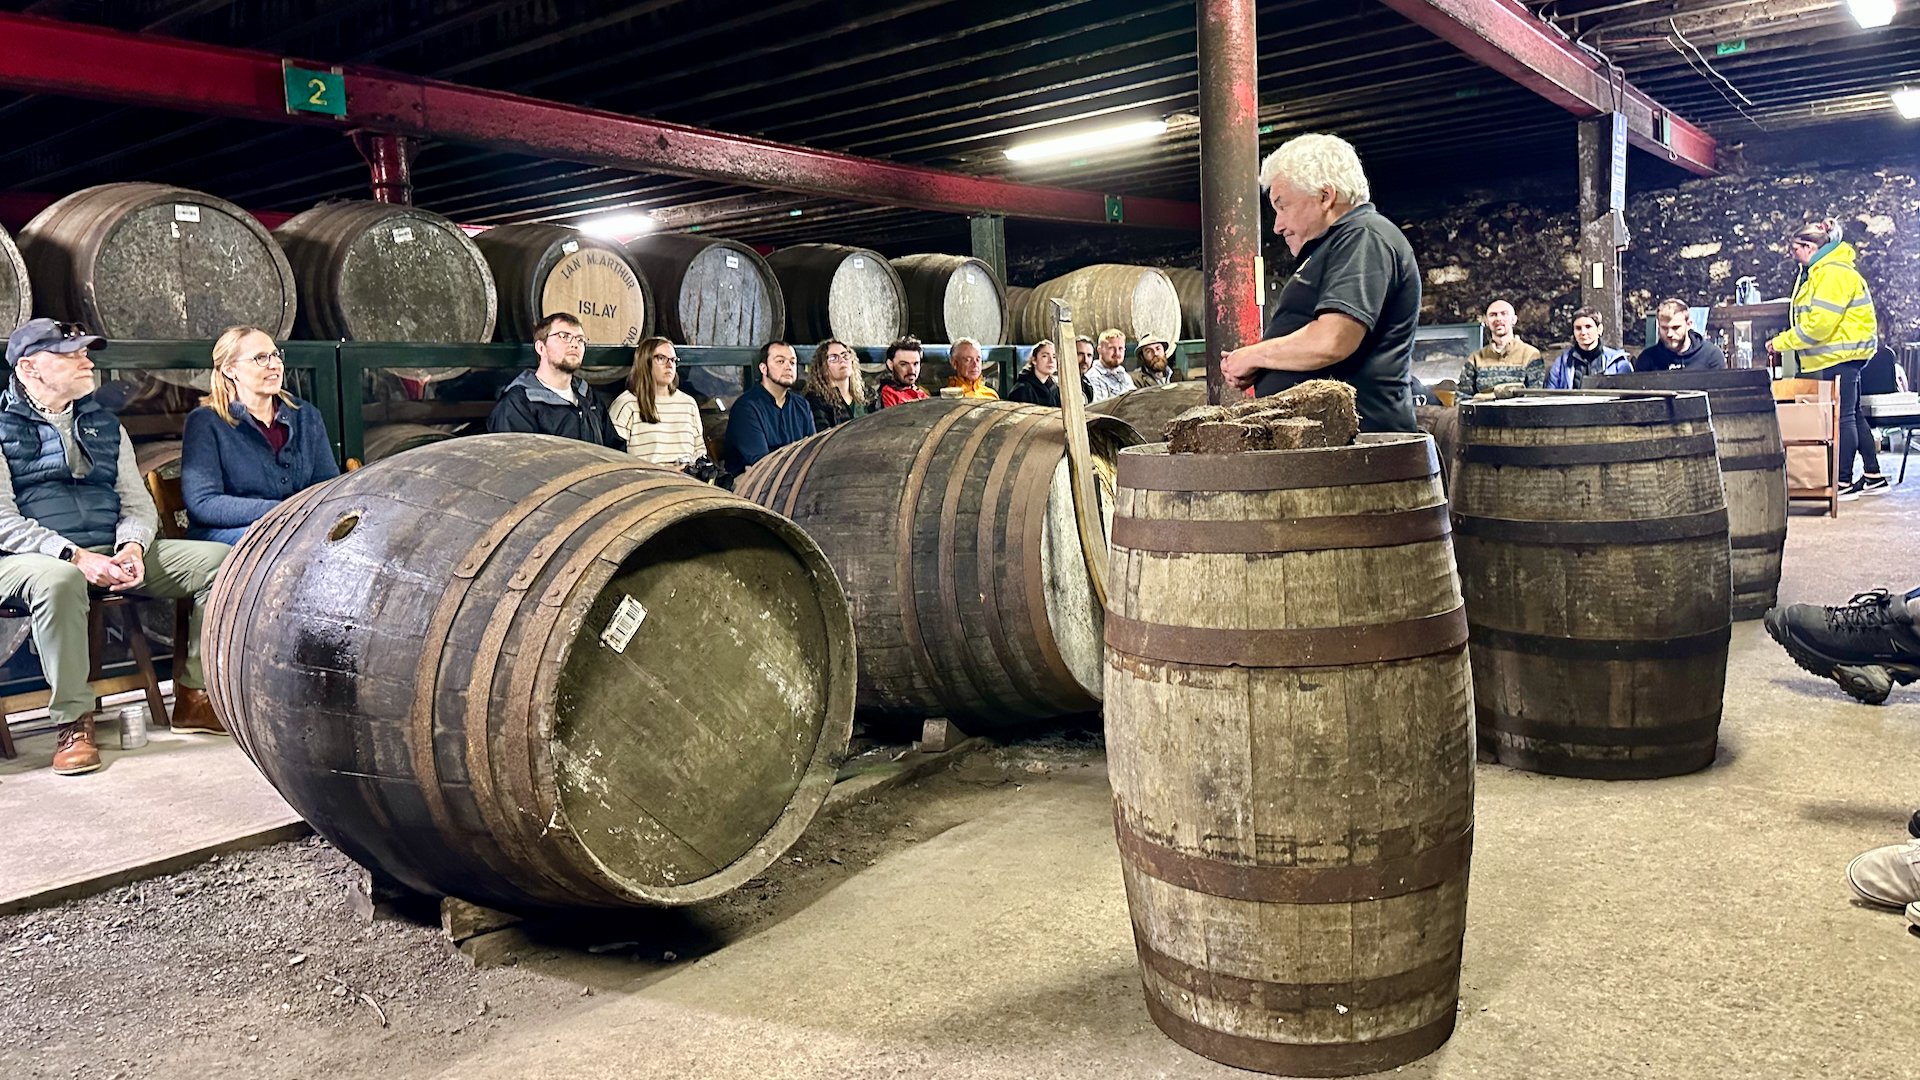  THis was our warehouse experience, which was excellent. The dude with the white hair in the middle was everything that you could have hoped for, and then some. We got a pretty great tasting experience out of it.  